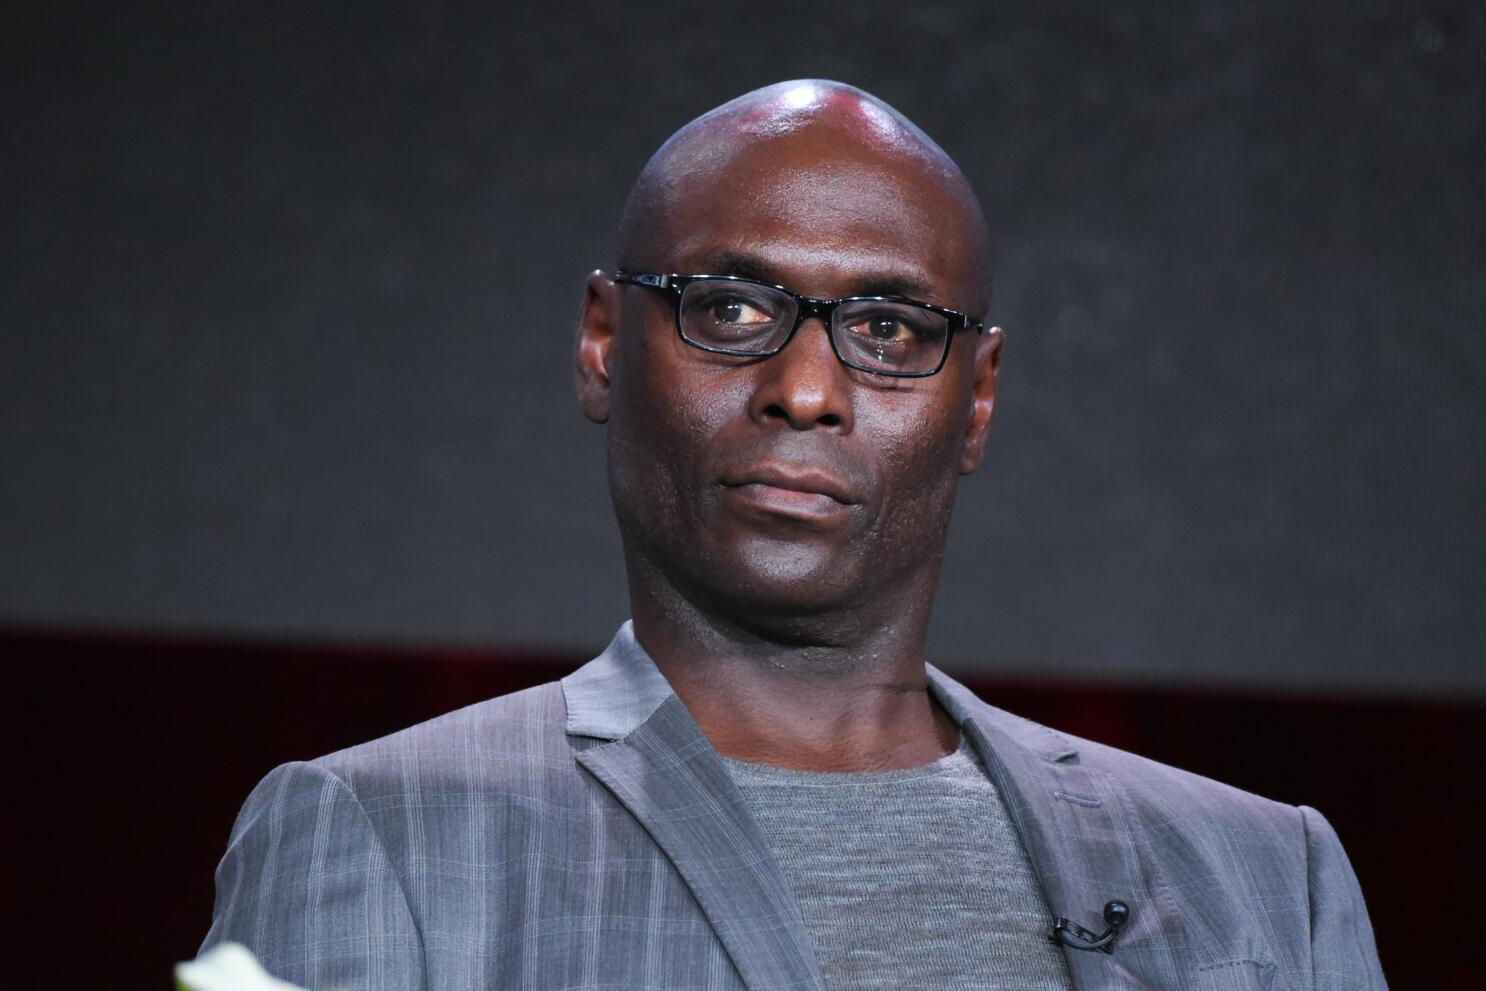 The Wire' star Lance Reddick dies from natural causes, publicist says